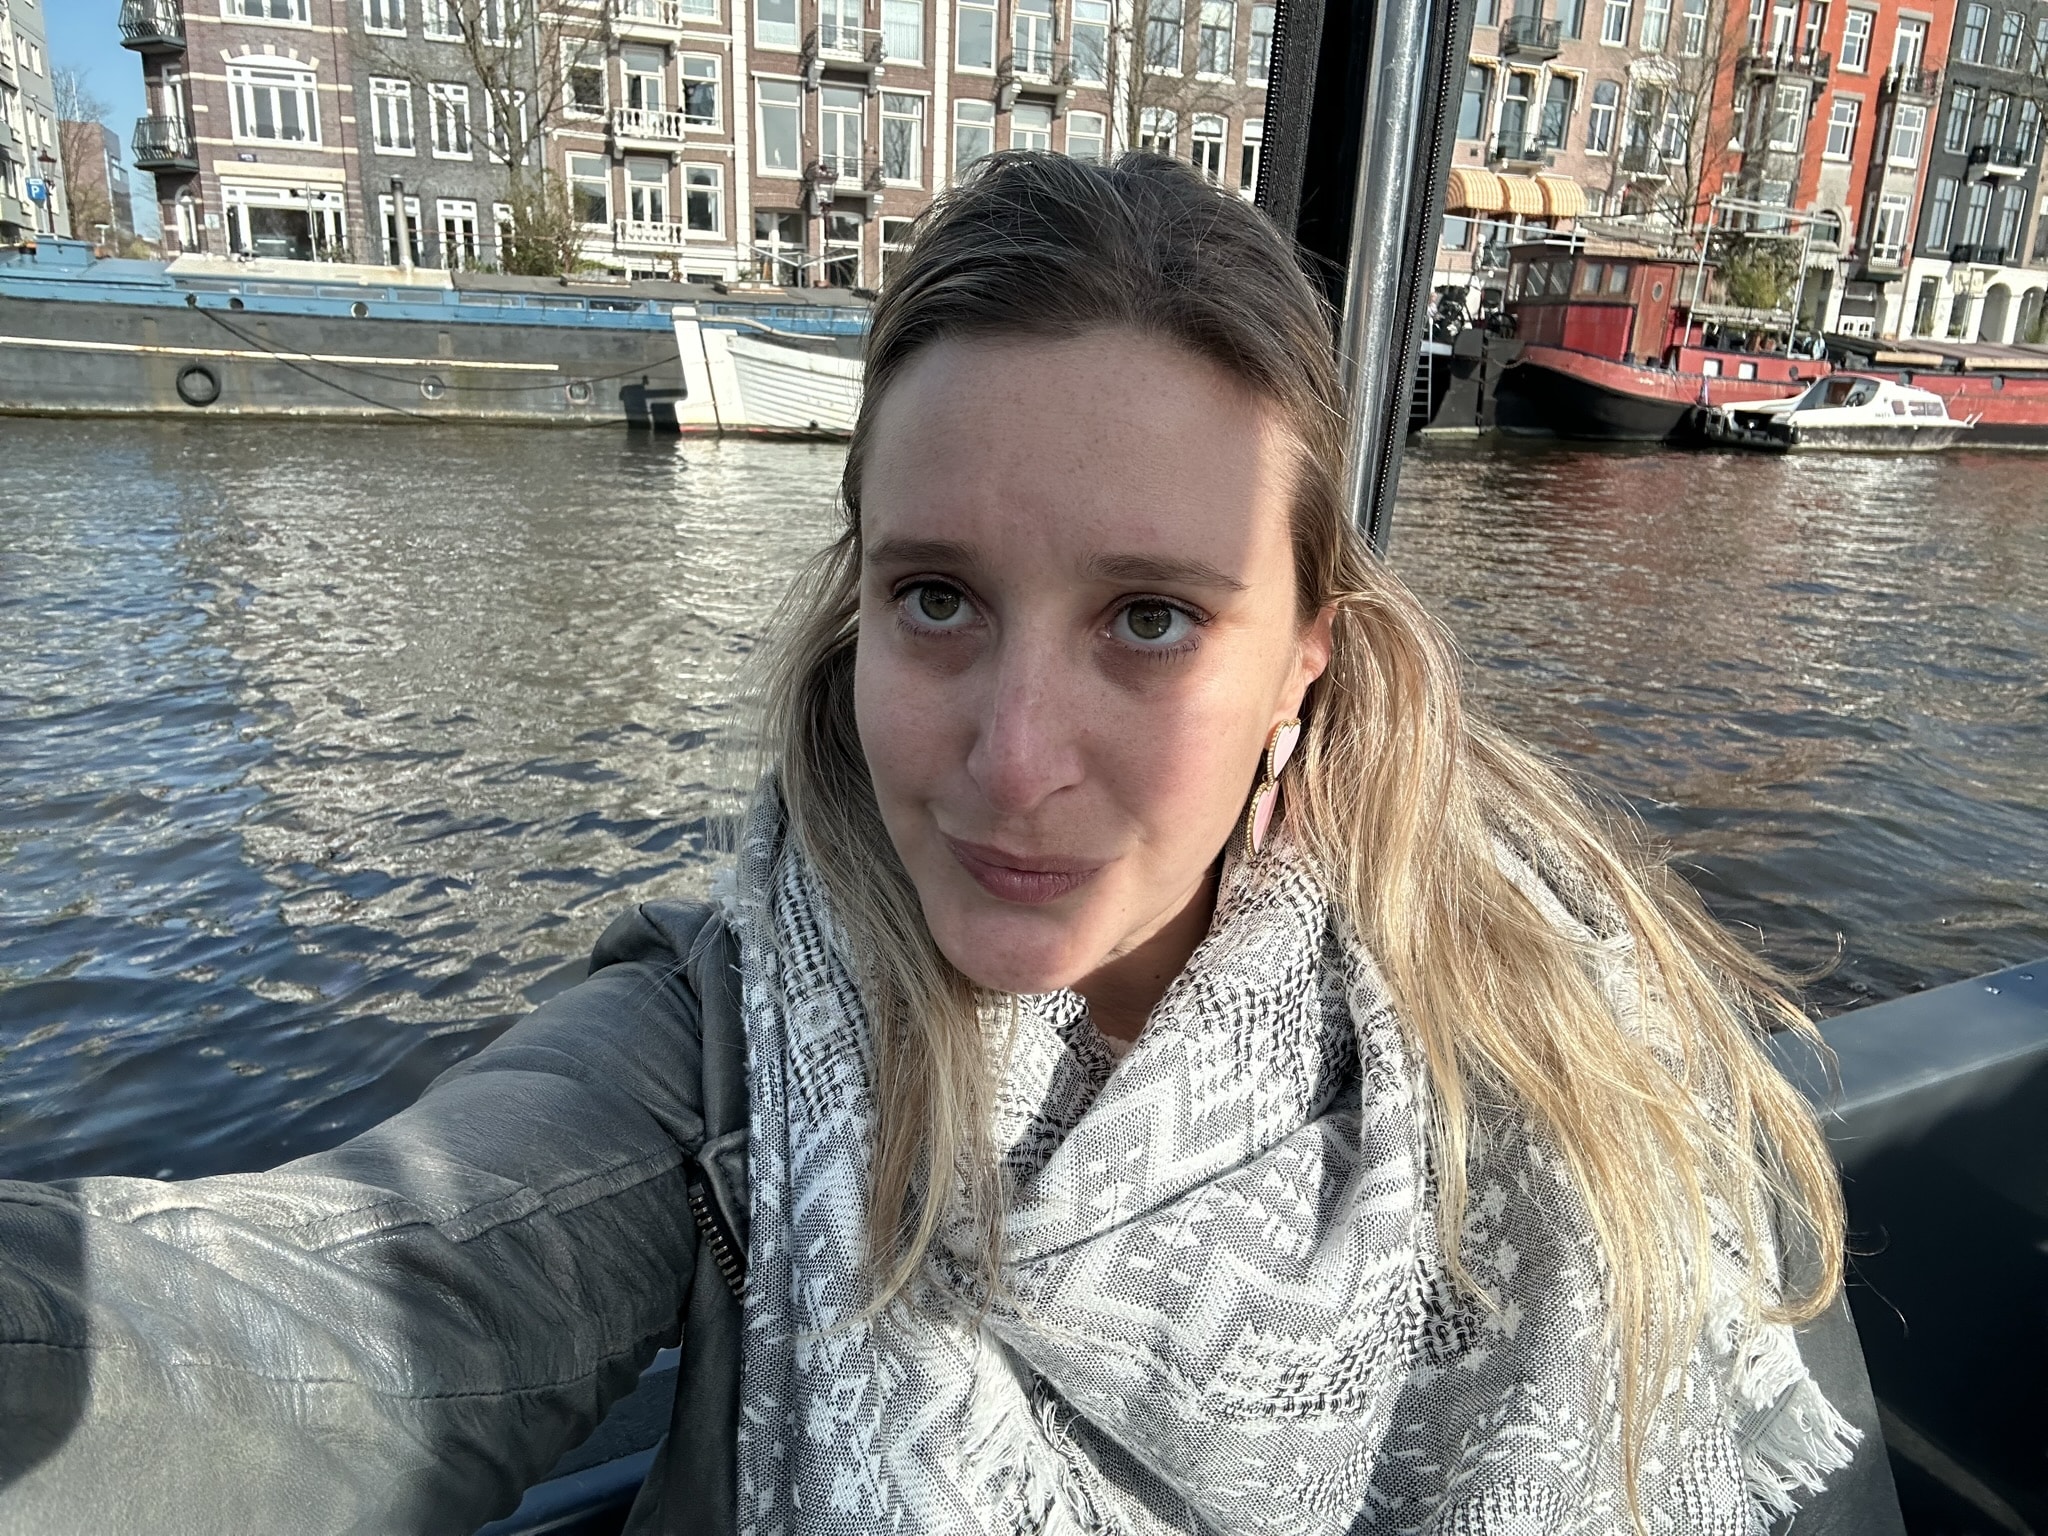 Lisa takes a selfie on a canal boat. 